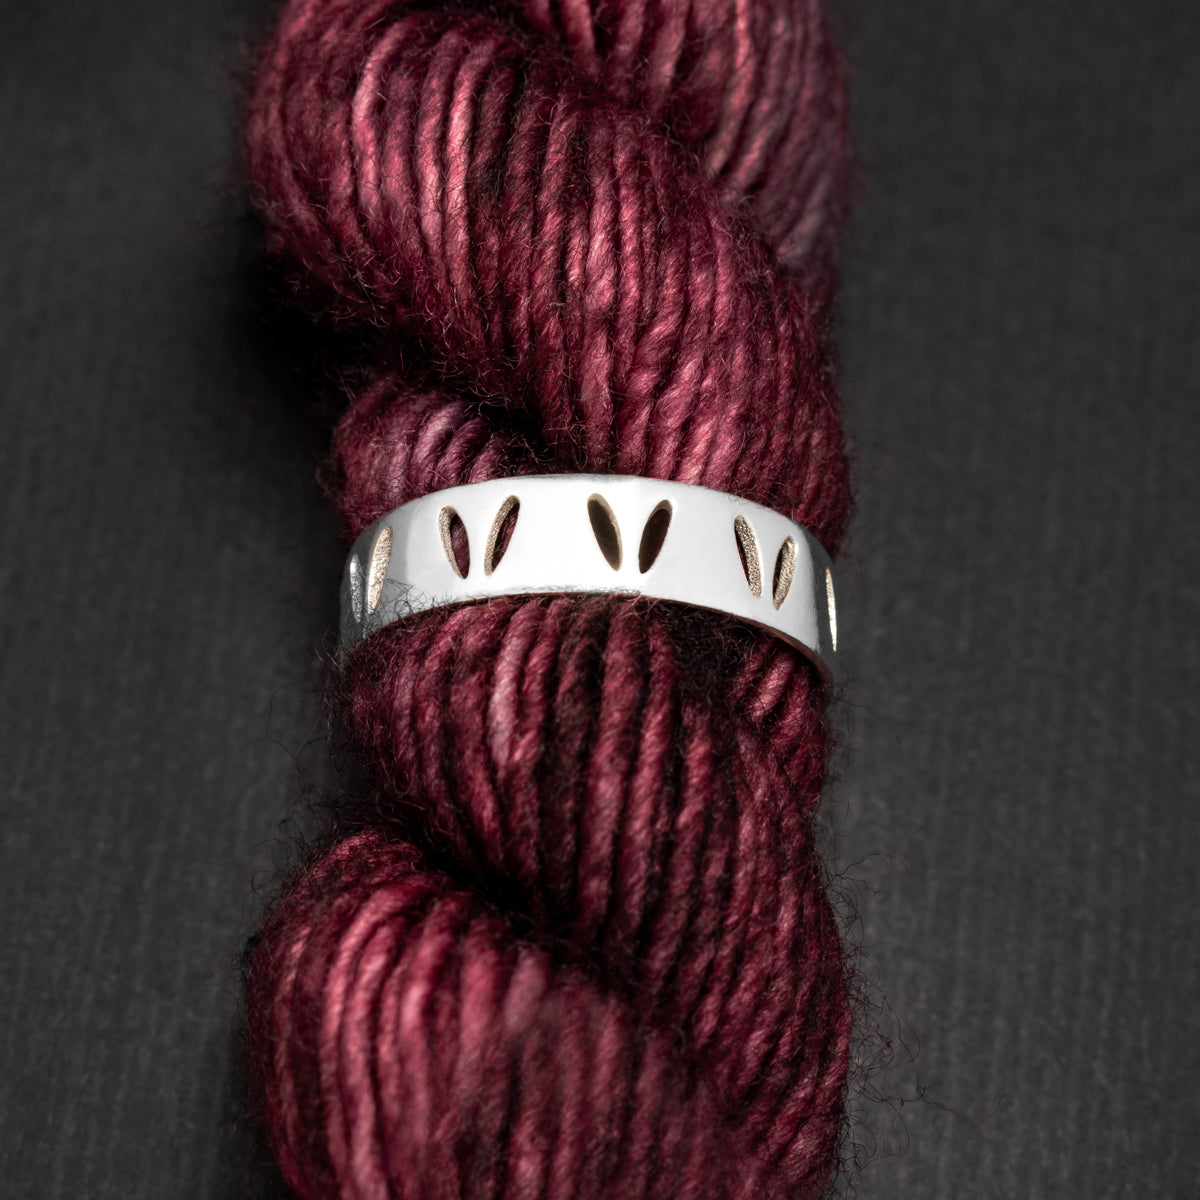 Gift for knitters_ Sterling Silver Luxury Stockinette Knit "Yarn Life" Ring